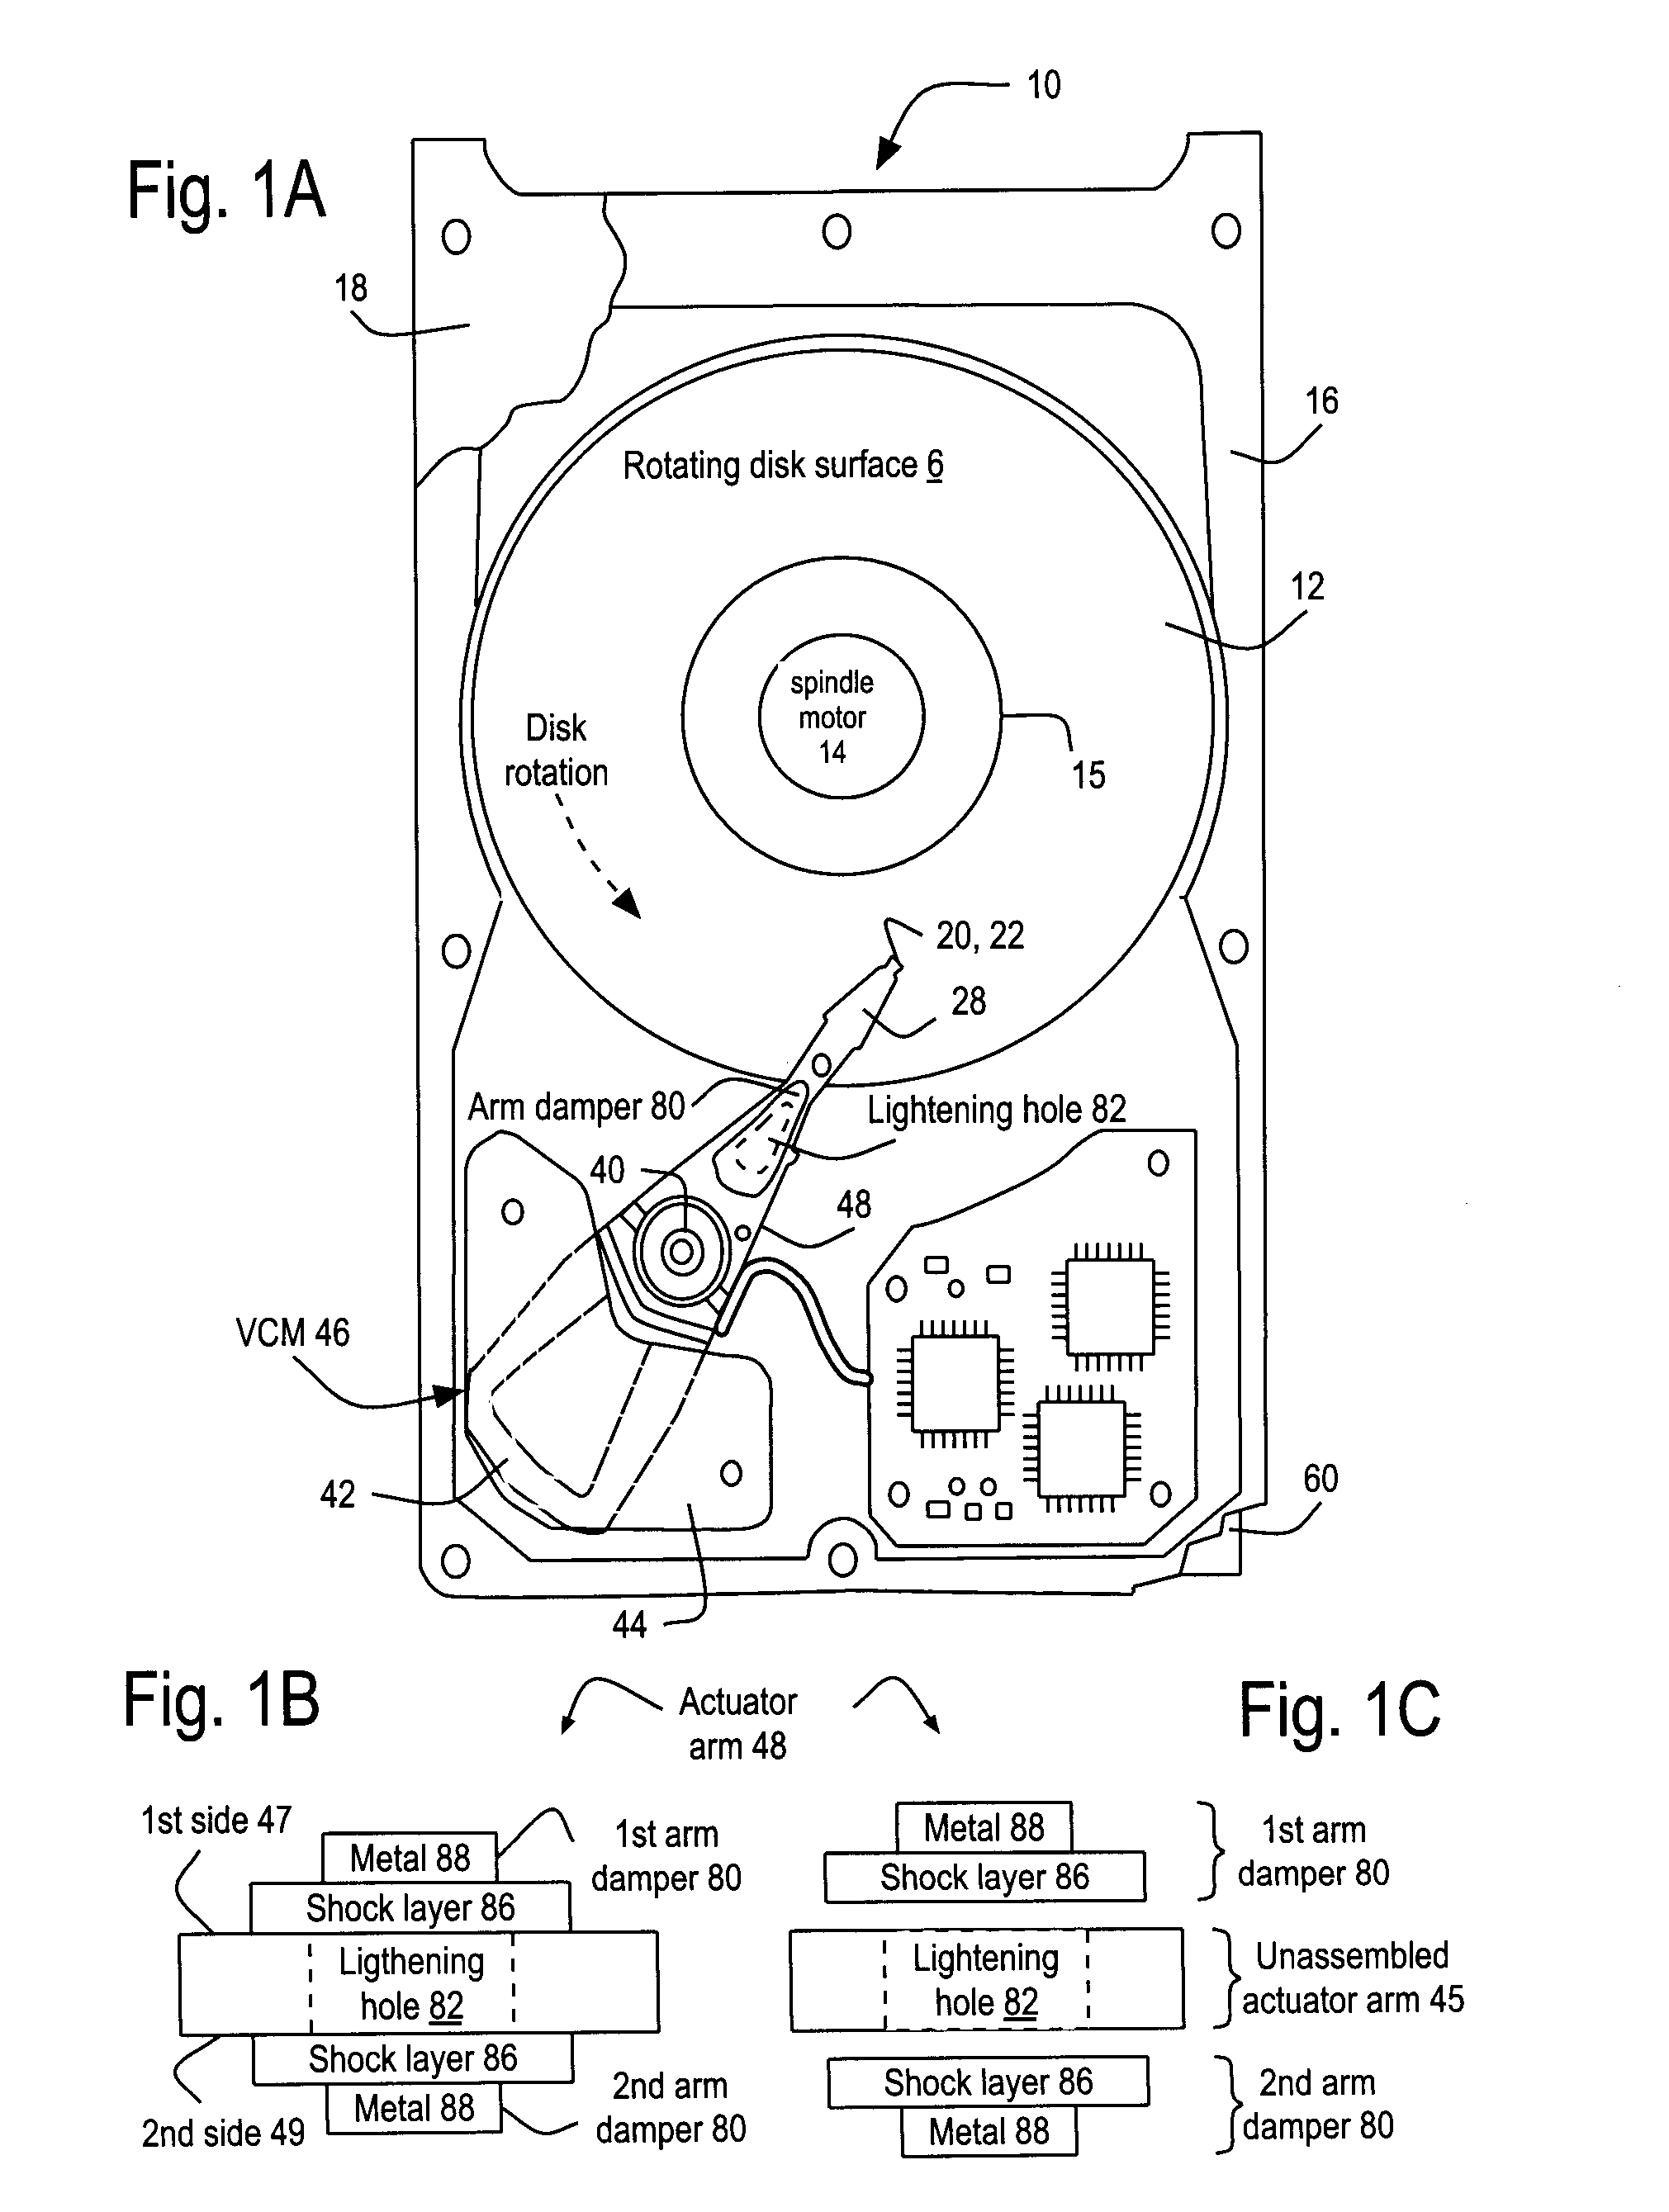 Method and apparatus for at least one actuator arm damper covering at least one lightening hole in a hard disk drive to reduce track mis-registration (TMR)